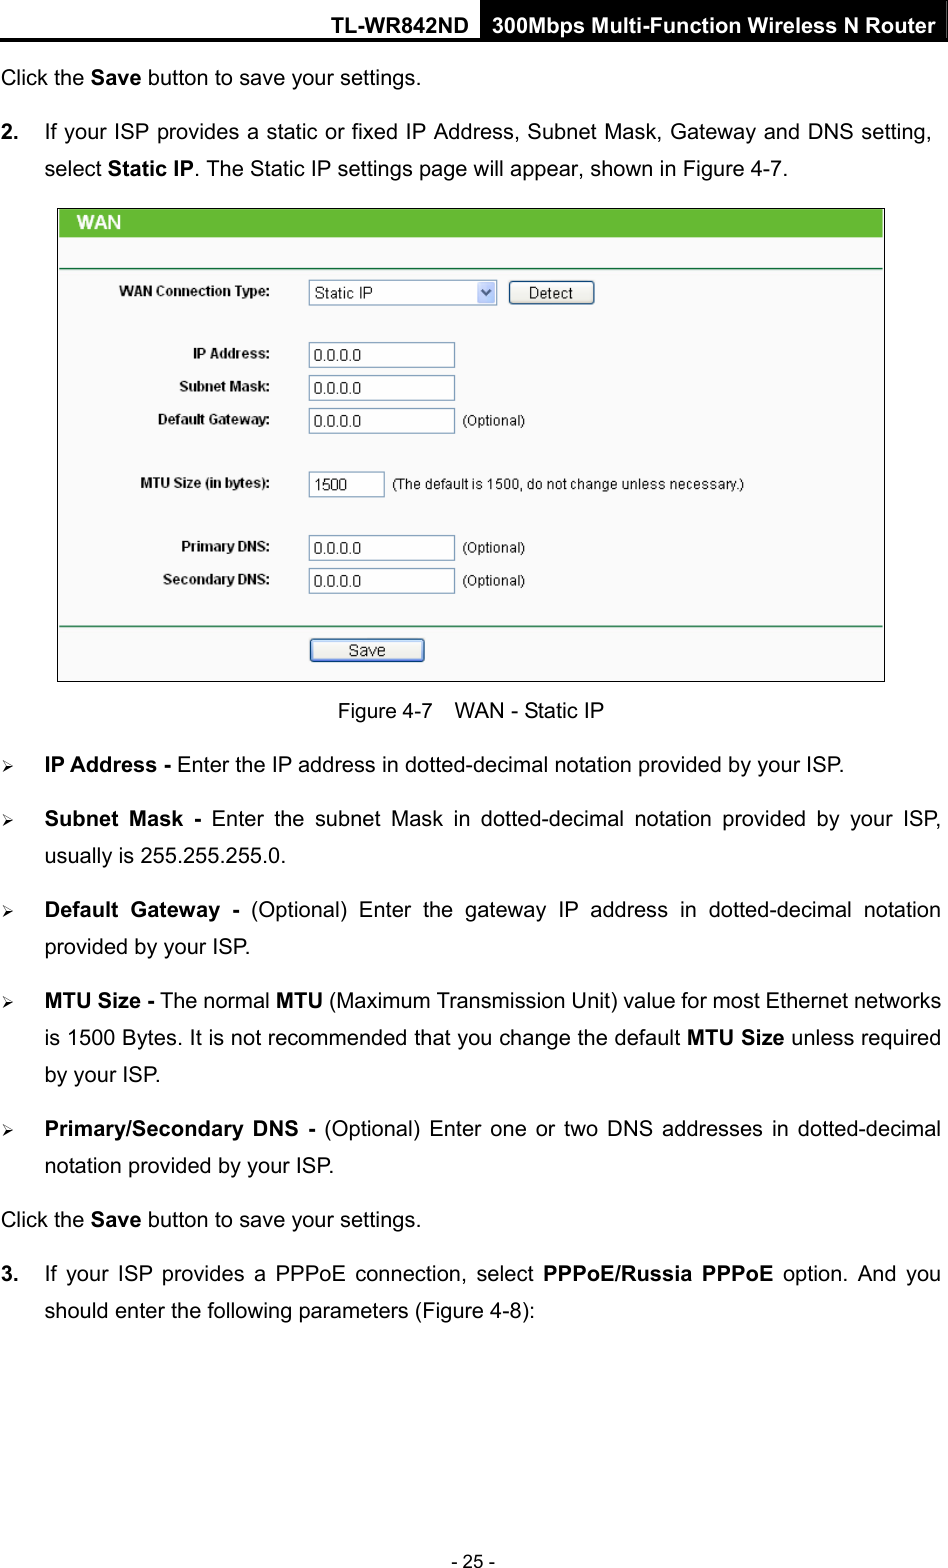 TL-WR842ND 300Mbps Multi-Function Wireless N Router - 25 - Click the Save button to save your settings. 2.  If your ISP provides a static or fixed IP Address, Subnet Mask, Gateway and DNS setting, select Static IP. The Static IP settings page will appear, shown in Figure 4-7.  Figure 4-7    WAN - Static IP ¾ IP Address - Enter the IP address in dotted-decimal notation provided by your ISP. ¾ Subnet Mask - Enter the subnet Mask in dotted-decimal notation provided by your ISP, usually is 255.255.255.0. ¾ Default Gateway - (Optional) Enter the gateway IP address in dotted-decimal notation provided by your ISP. ¾ MTU Size - The normal MTU (Maximum Transmission Unit) value for most Ethernet networks is 1500 Bytes. It is not recommended that you change the default MTU Size unless required by your ISP.   ¾ Primary/Secondary DNS - (Optional) Enter one or two DNS addresses in dotted-decimal notation provided by your ISP. Click the Save button to save your settings. 3.  If your ISP provides a PPPoE connection, select PPPoE/Russia PPPoE option. And you should enter the following parameters (Figure 4-8): 